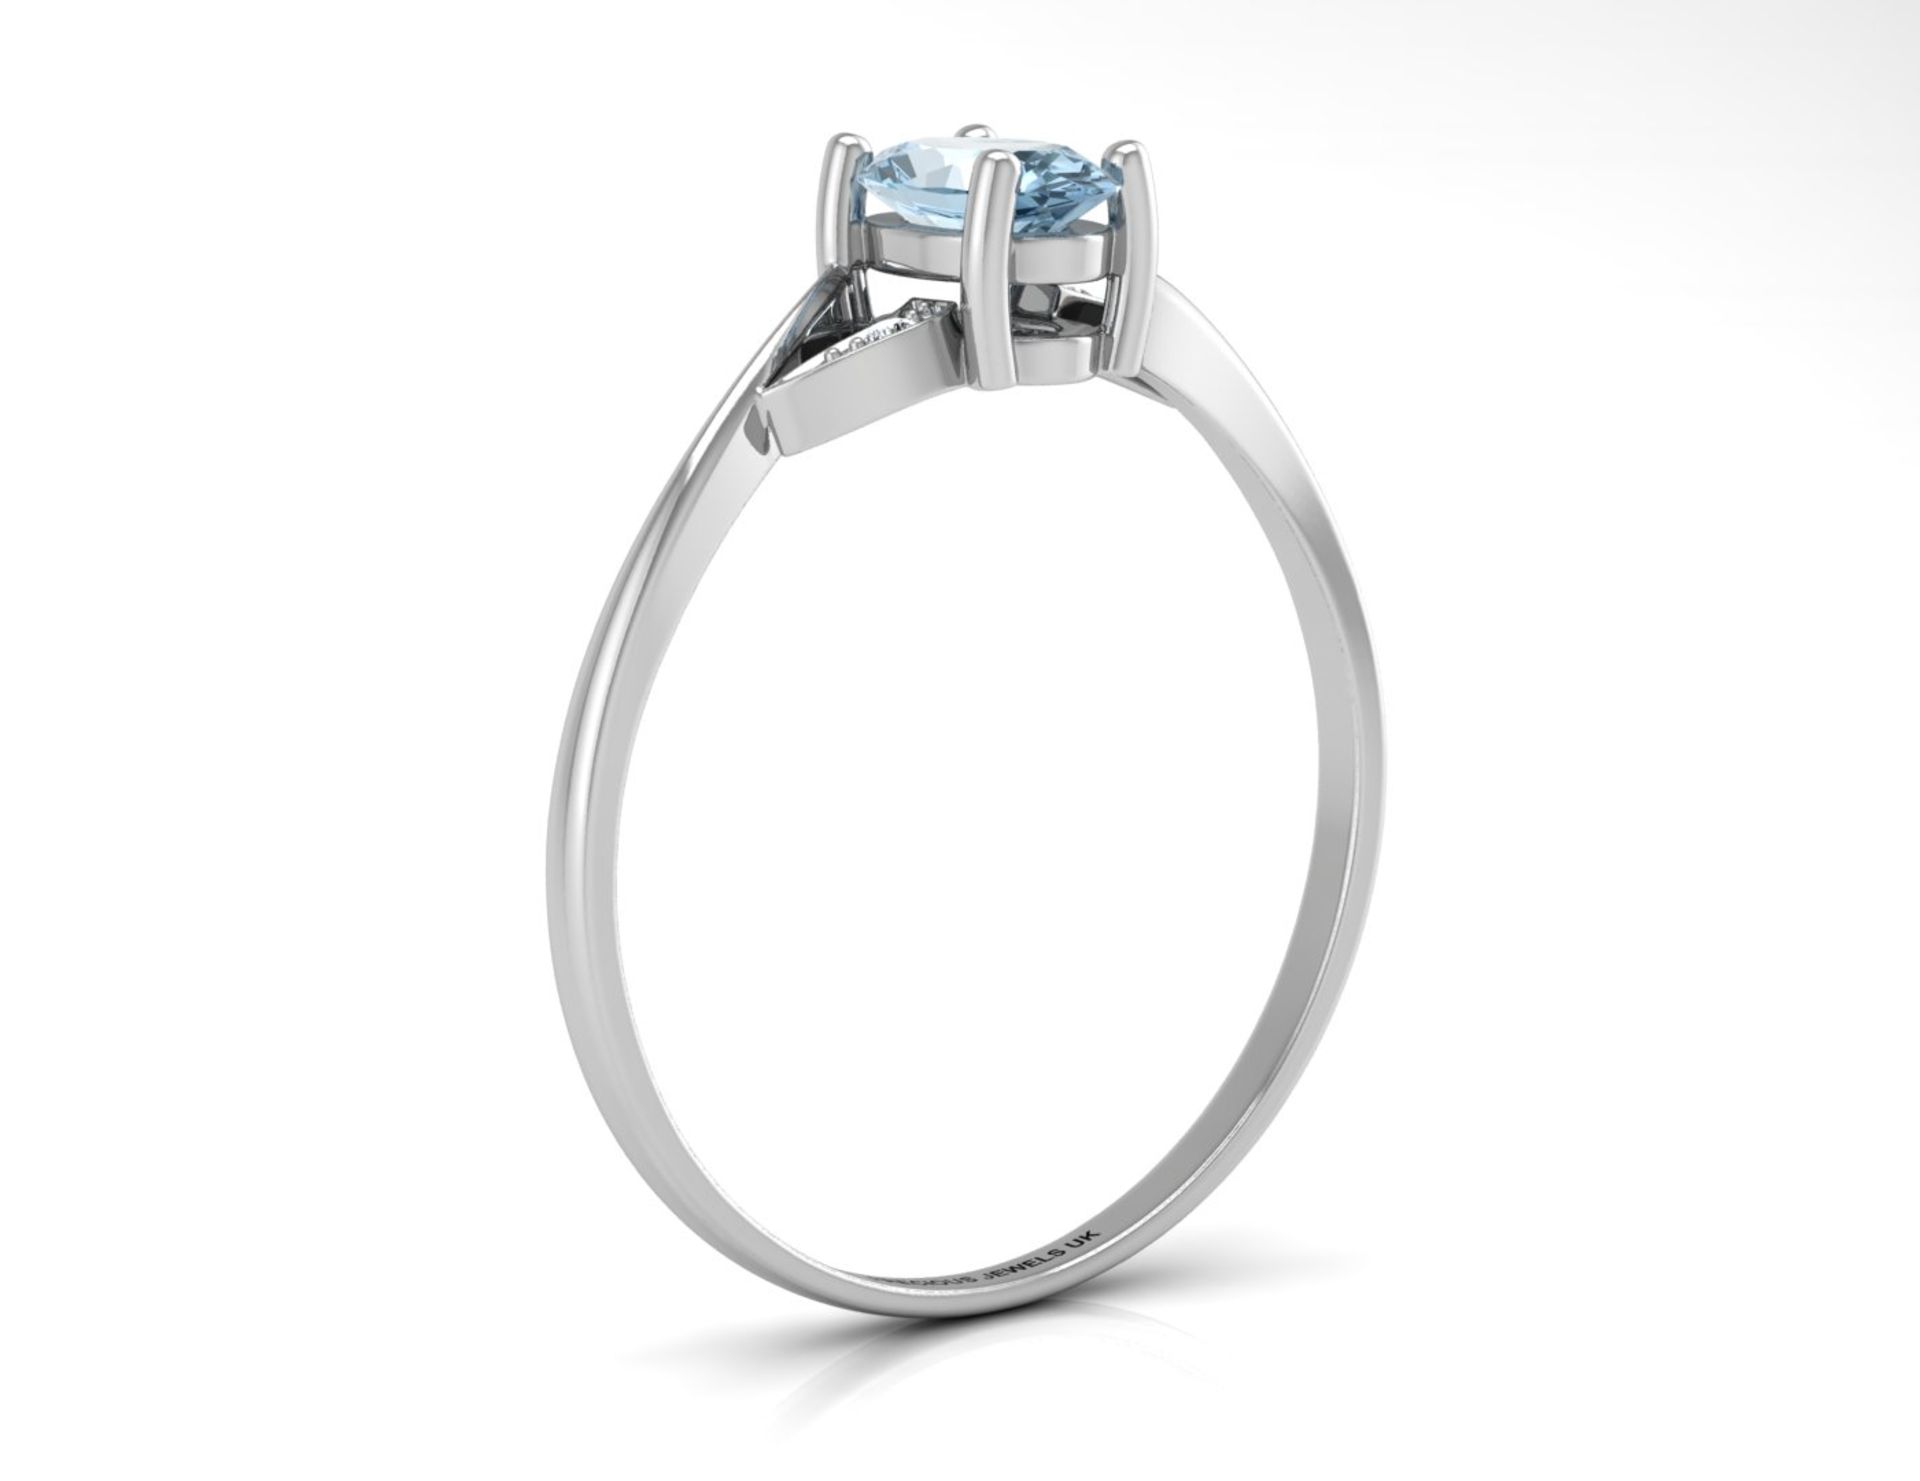 9ct White Gold Diamond And Blue Topaz Ring 0.01 Carats - Valued by AGI £625.00 - 9ct White Gold - Image 2 of 4